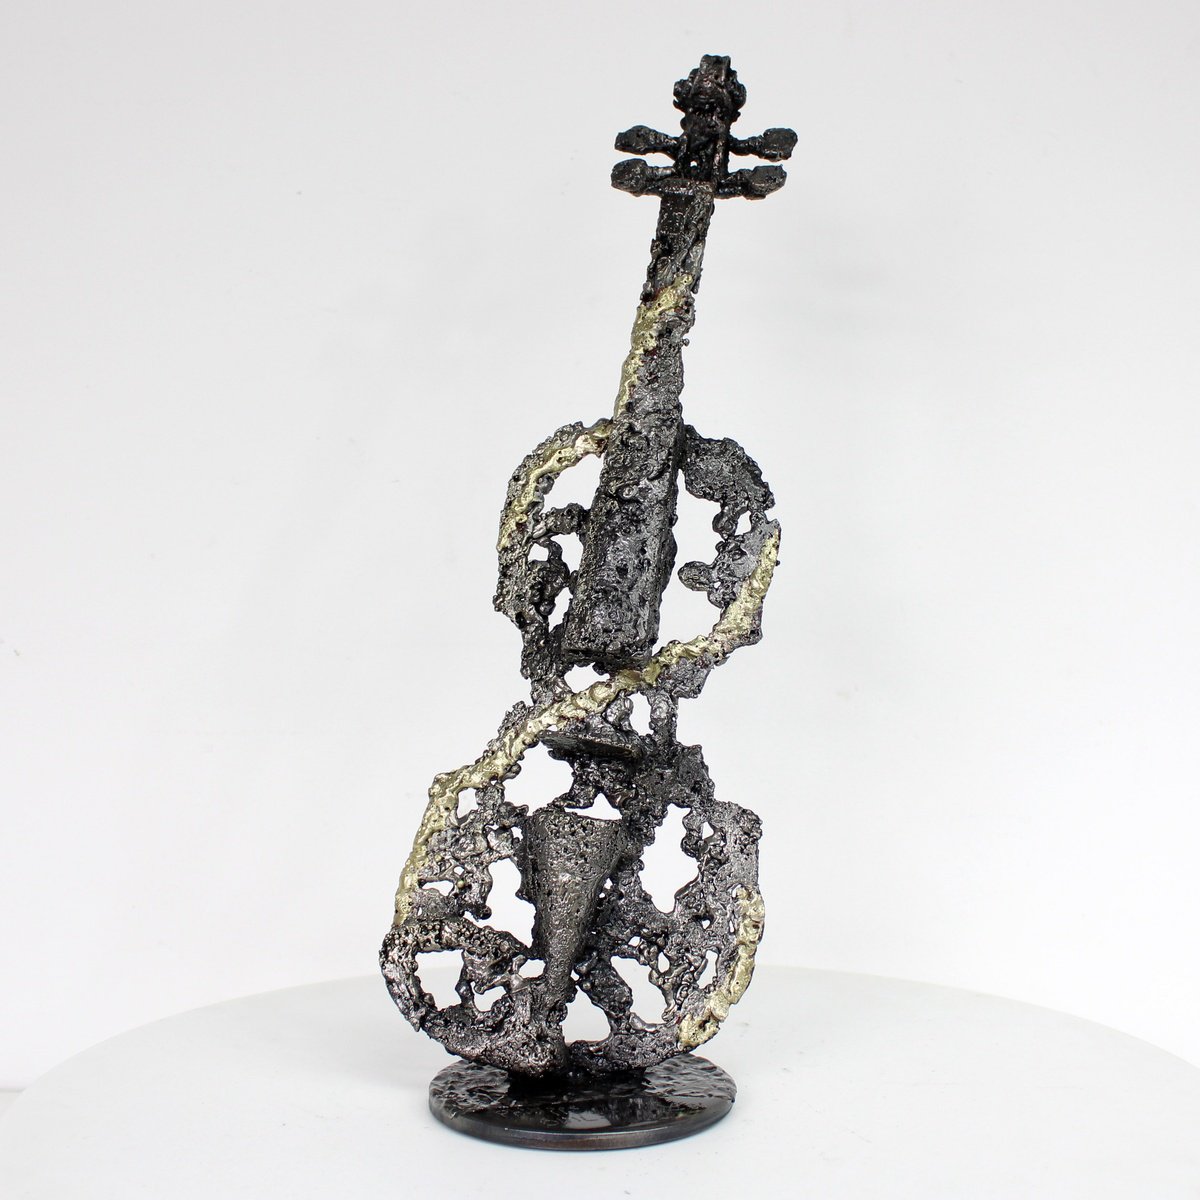 Forgotten by the gods 97-22 - Sculpture violin lace metal steel and brass by Philippe Buil